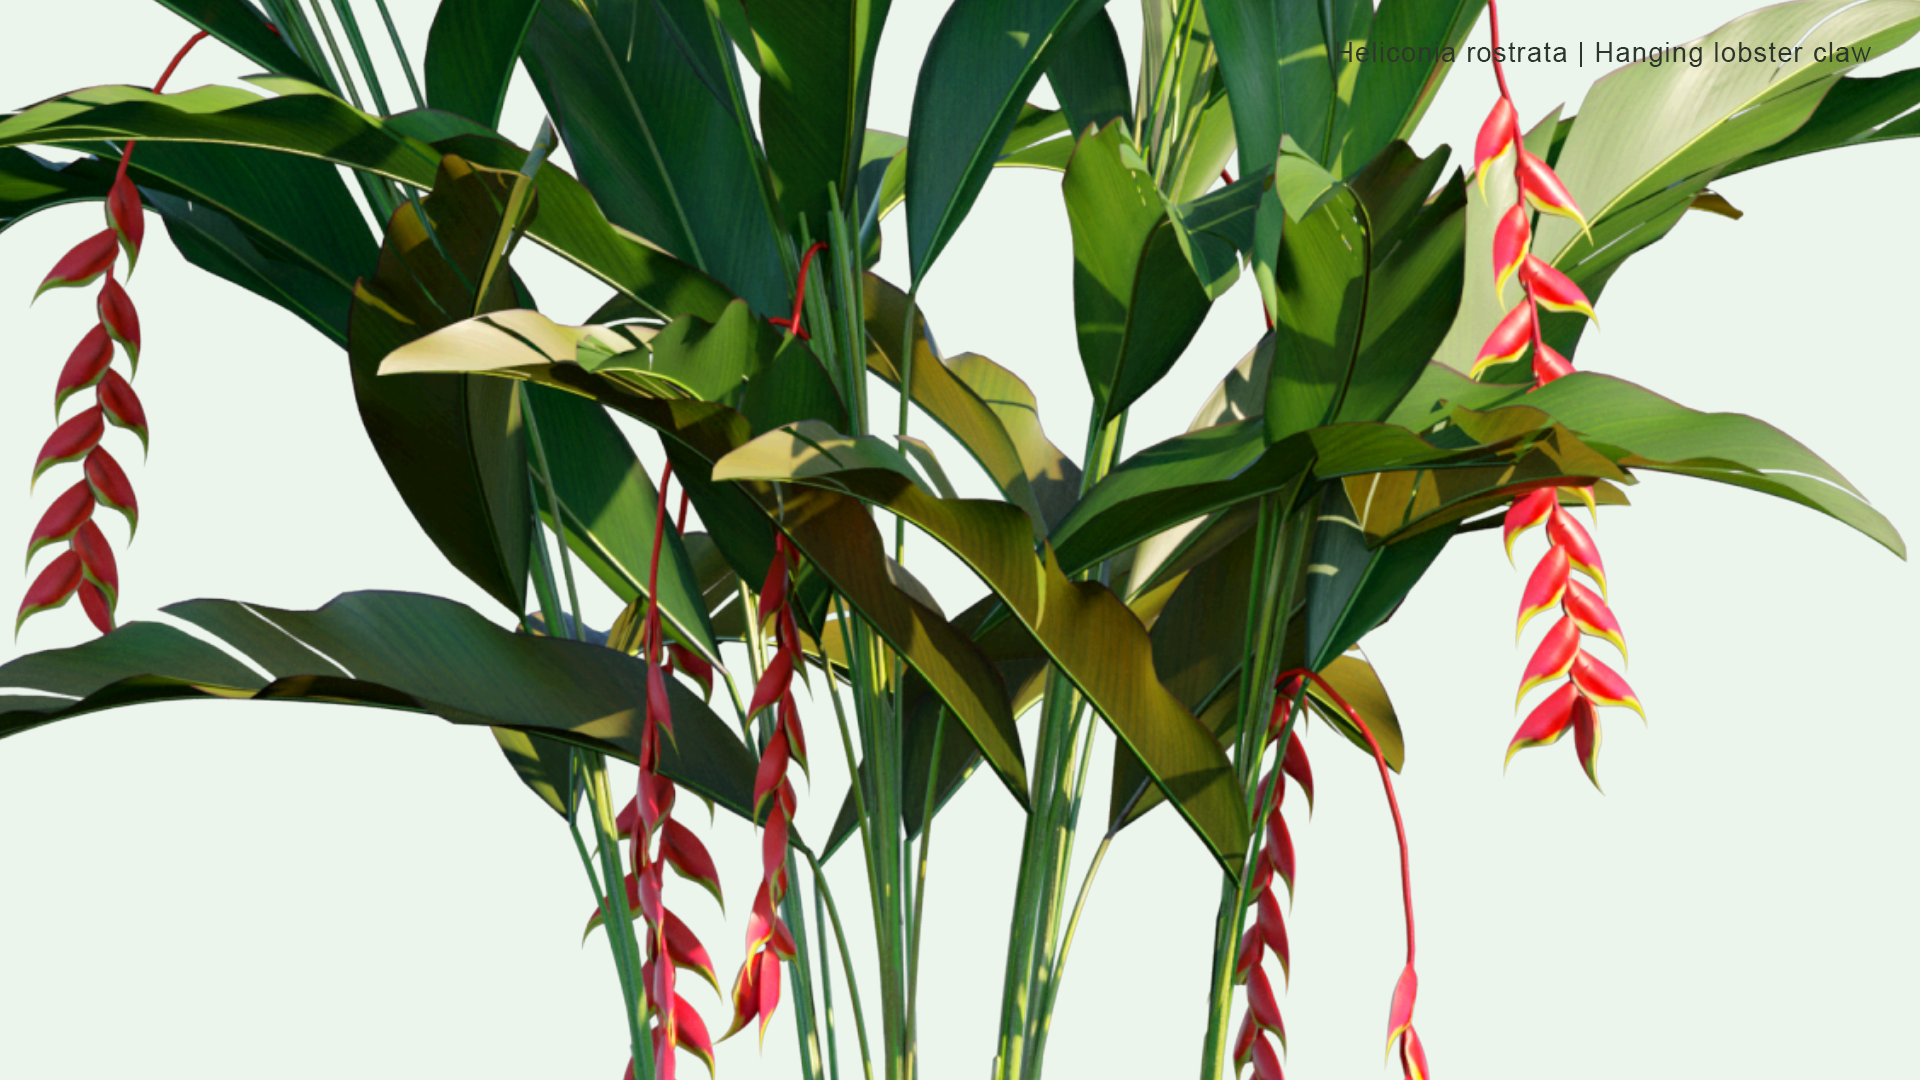 2D Heliconia Rostrata - Hanging Lobster Claw